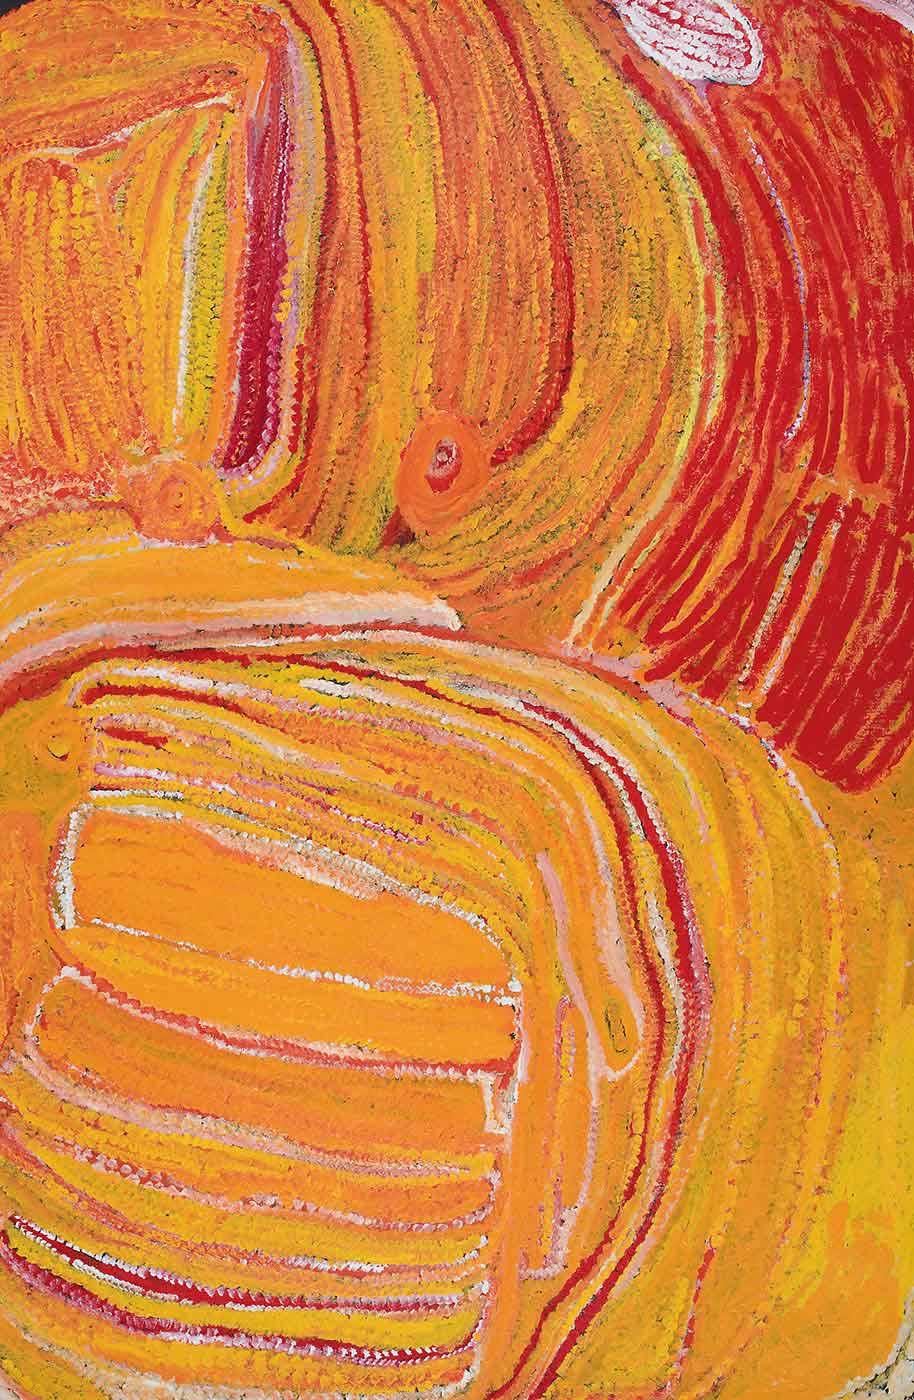 A textured yellow-orange toned painting on brown linen with a curved vertically lined red section in the top right corner with a white and red oval above it. On the top left and middle half of the painting are curved and straight vertical stripes in yellow, pink, orange, burgundy, red and white with two orange-yellow circles towards the middle section of the painting. The bottom left has an outlined rounded rectangle with horizontal stripes in yellow divided by thin dotted lines in white, red, orange or pink. The right side of the painting features a curved vertical section which follows the edge of the shape on the left and fills the area with yellows and a little bit of pink, white, red and orange. - click to view larger image